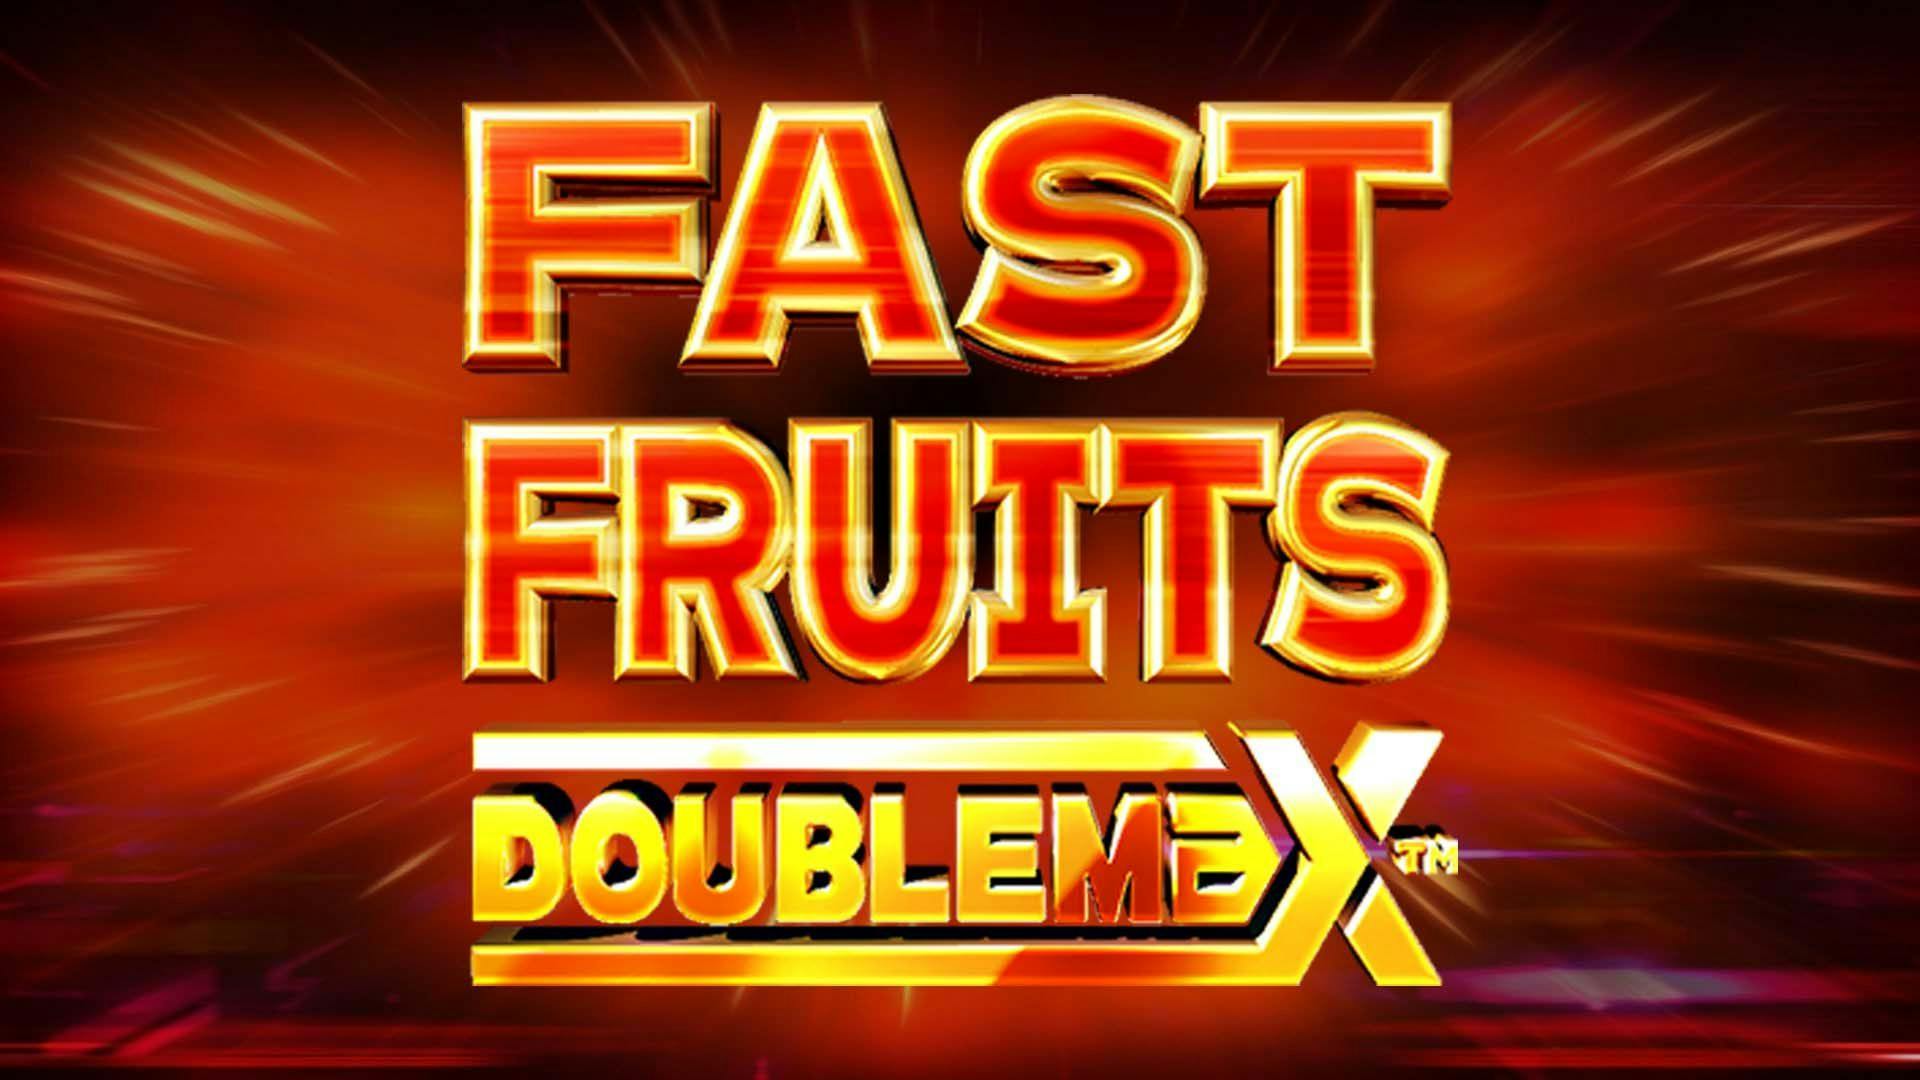 Fast Fruits DoubleMax Slot Machine Online Free Game Play